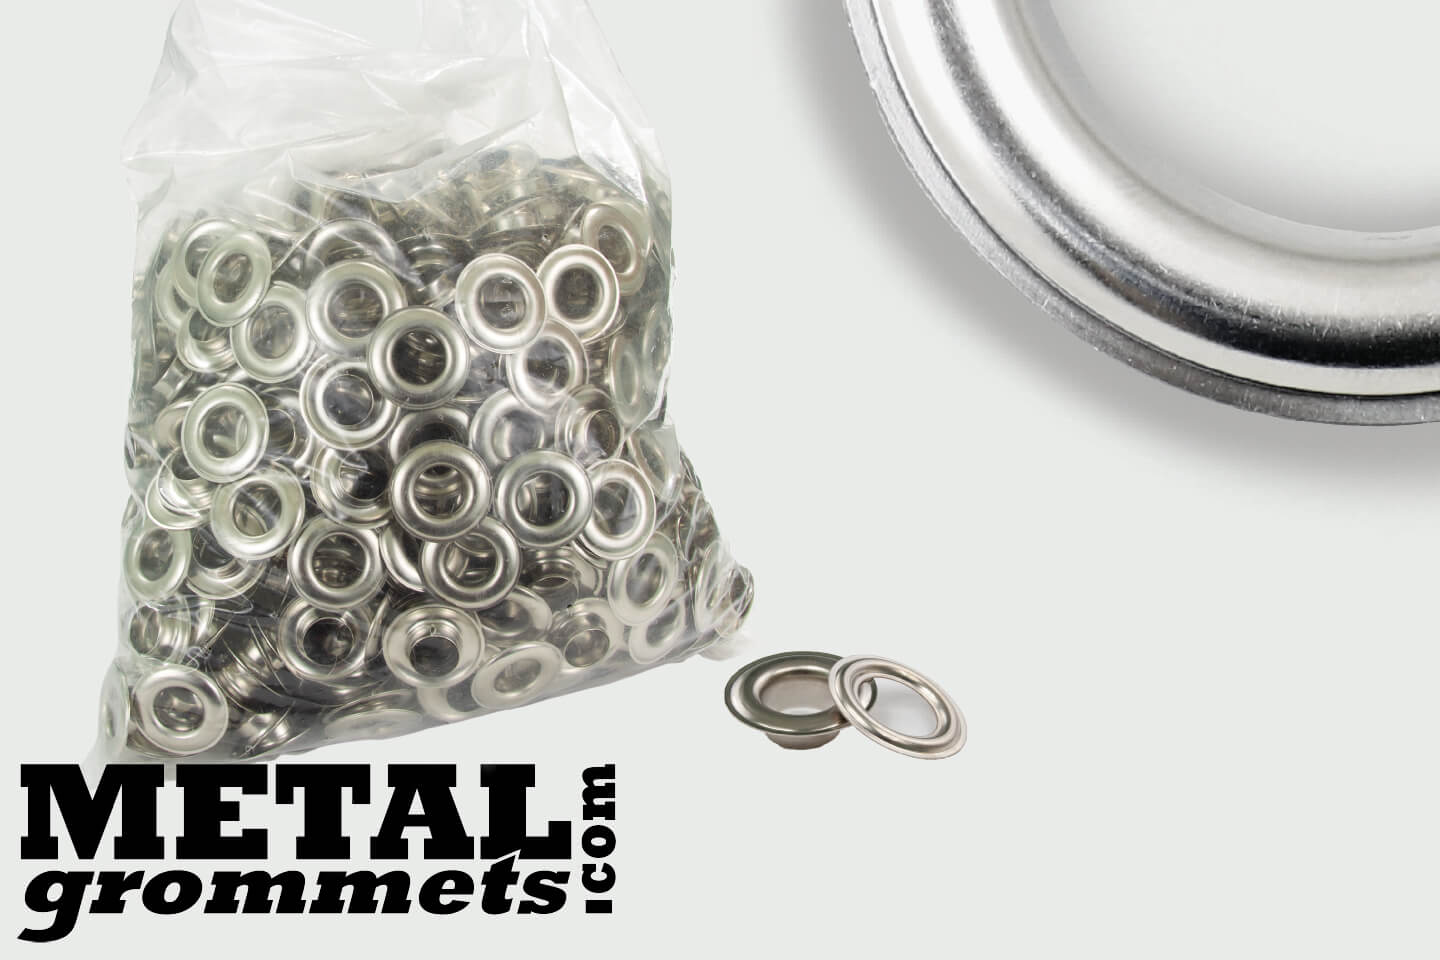 #3 (7/16 - 0.4375 Hole Size) Nickel plated grommets & washers